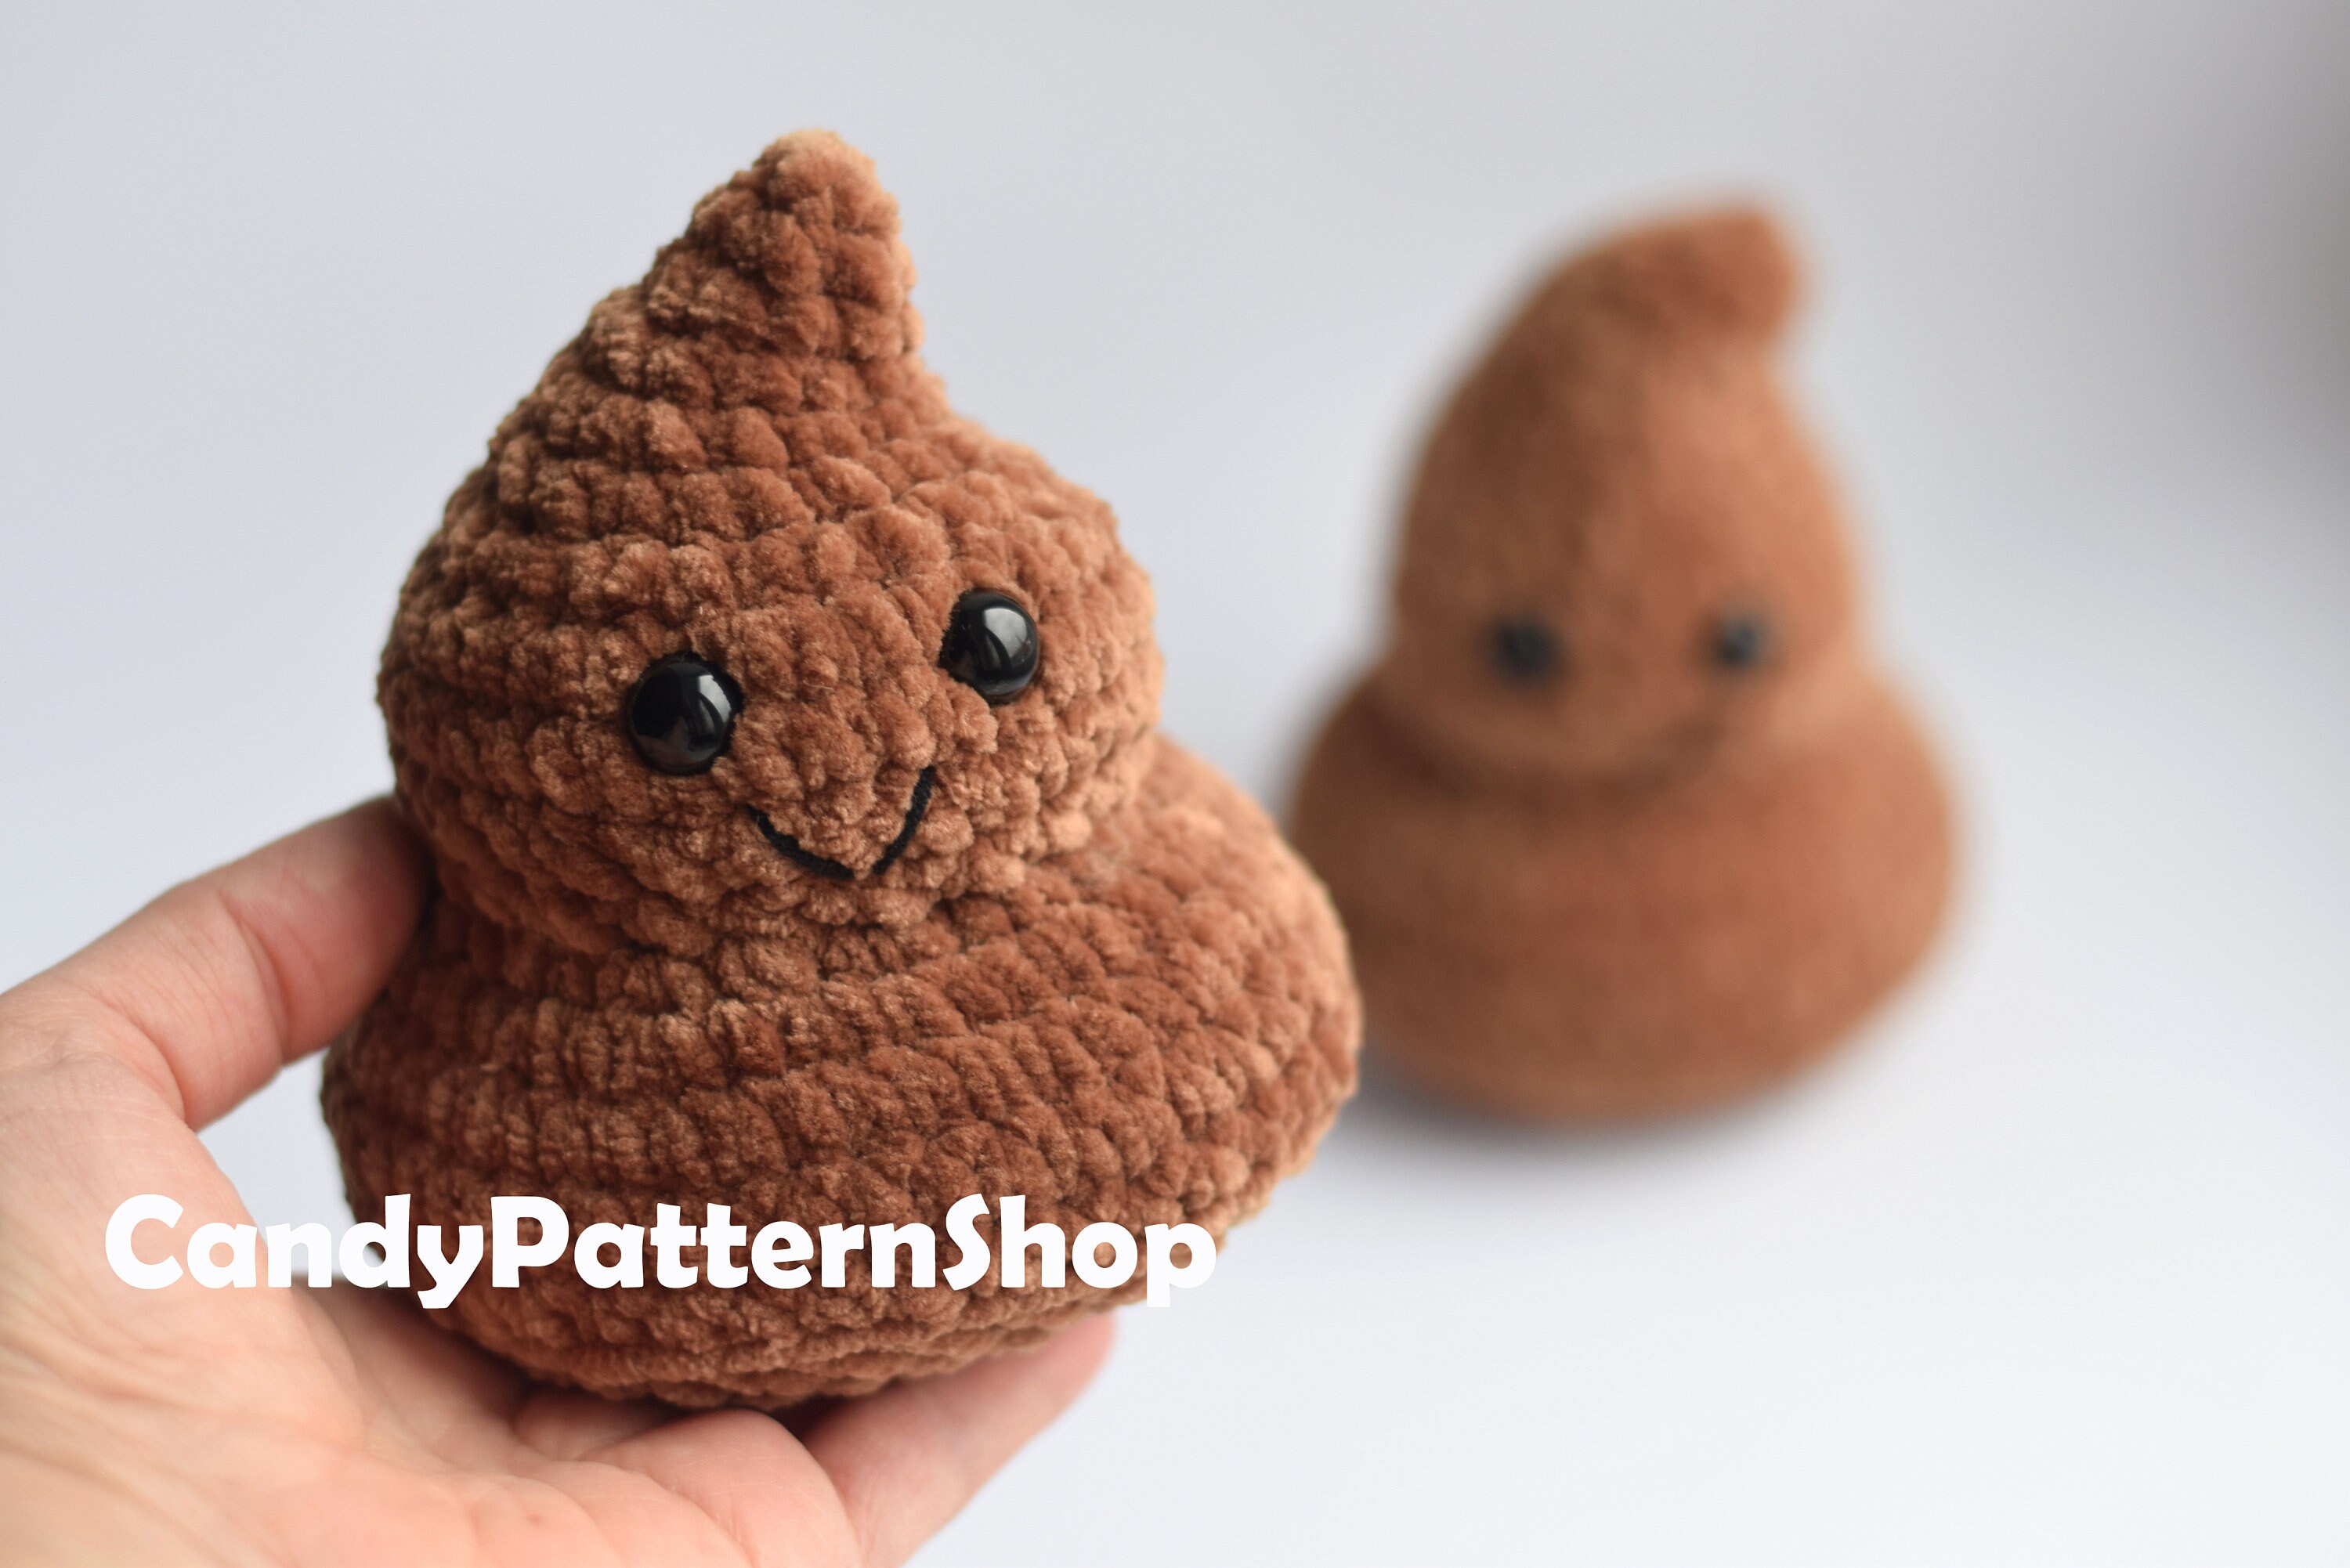 Wegem 2PCS Positive Funny Knitted Poo, Crochet Poo with Positive Message  Card for Encouragement, Funny Cute Small Gifts for Friends (2pcs Poo)